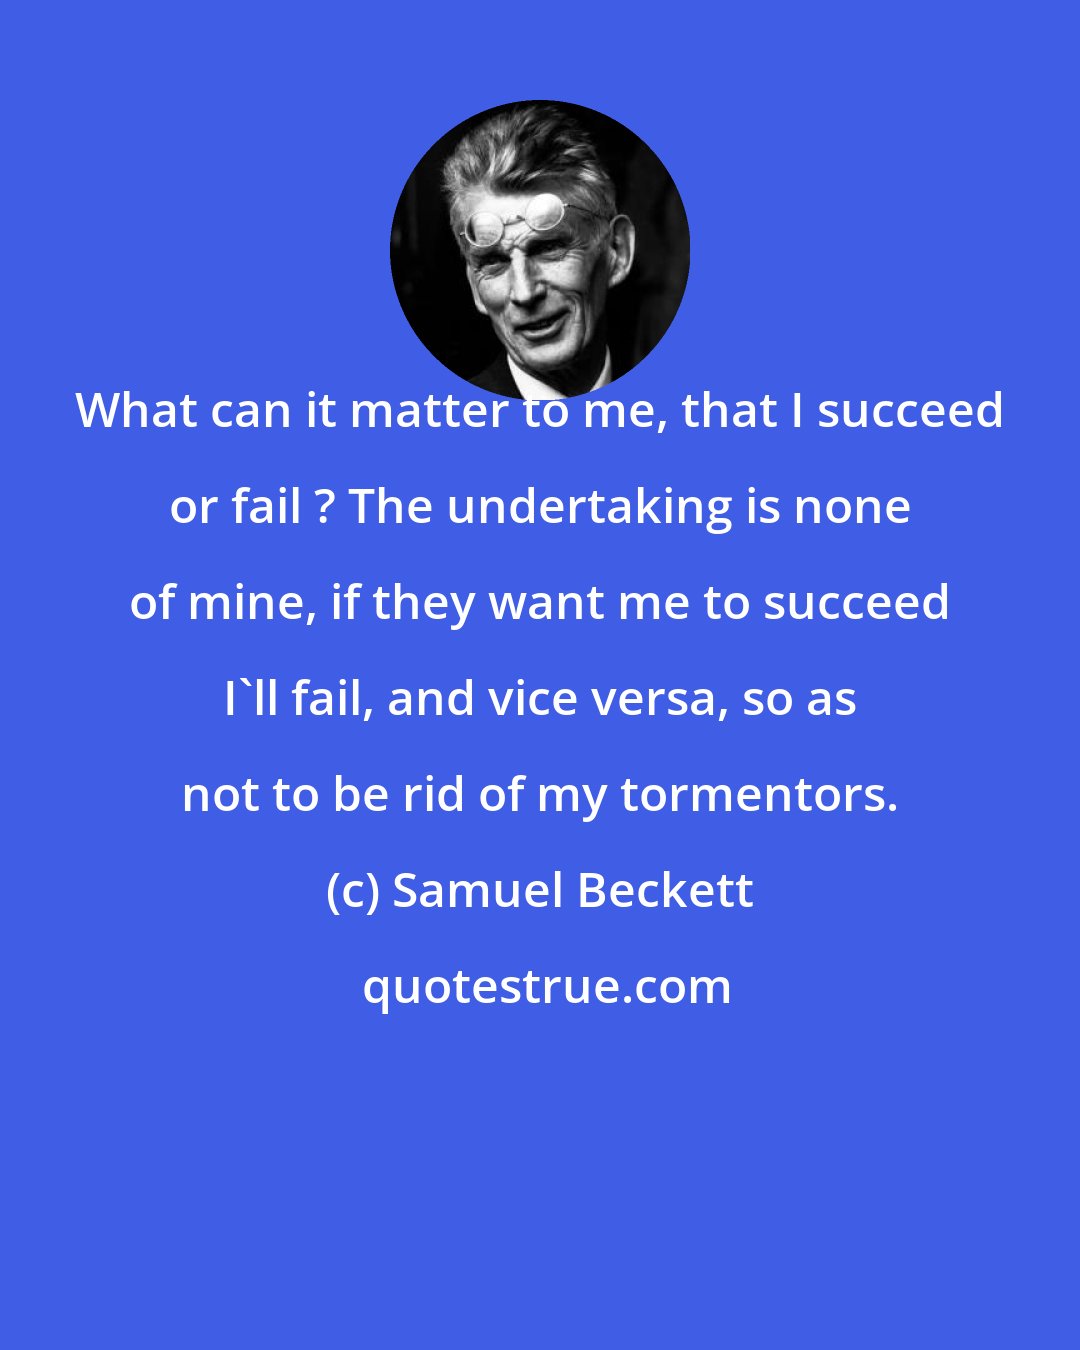 Samuel Beckett: What can it matter to me, that I succeed or fail ? The undertaking is none of mine, if they want me to succeed I'll fail, and vice versa, so as not to be rid of my tormentors.